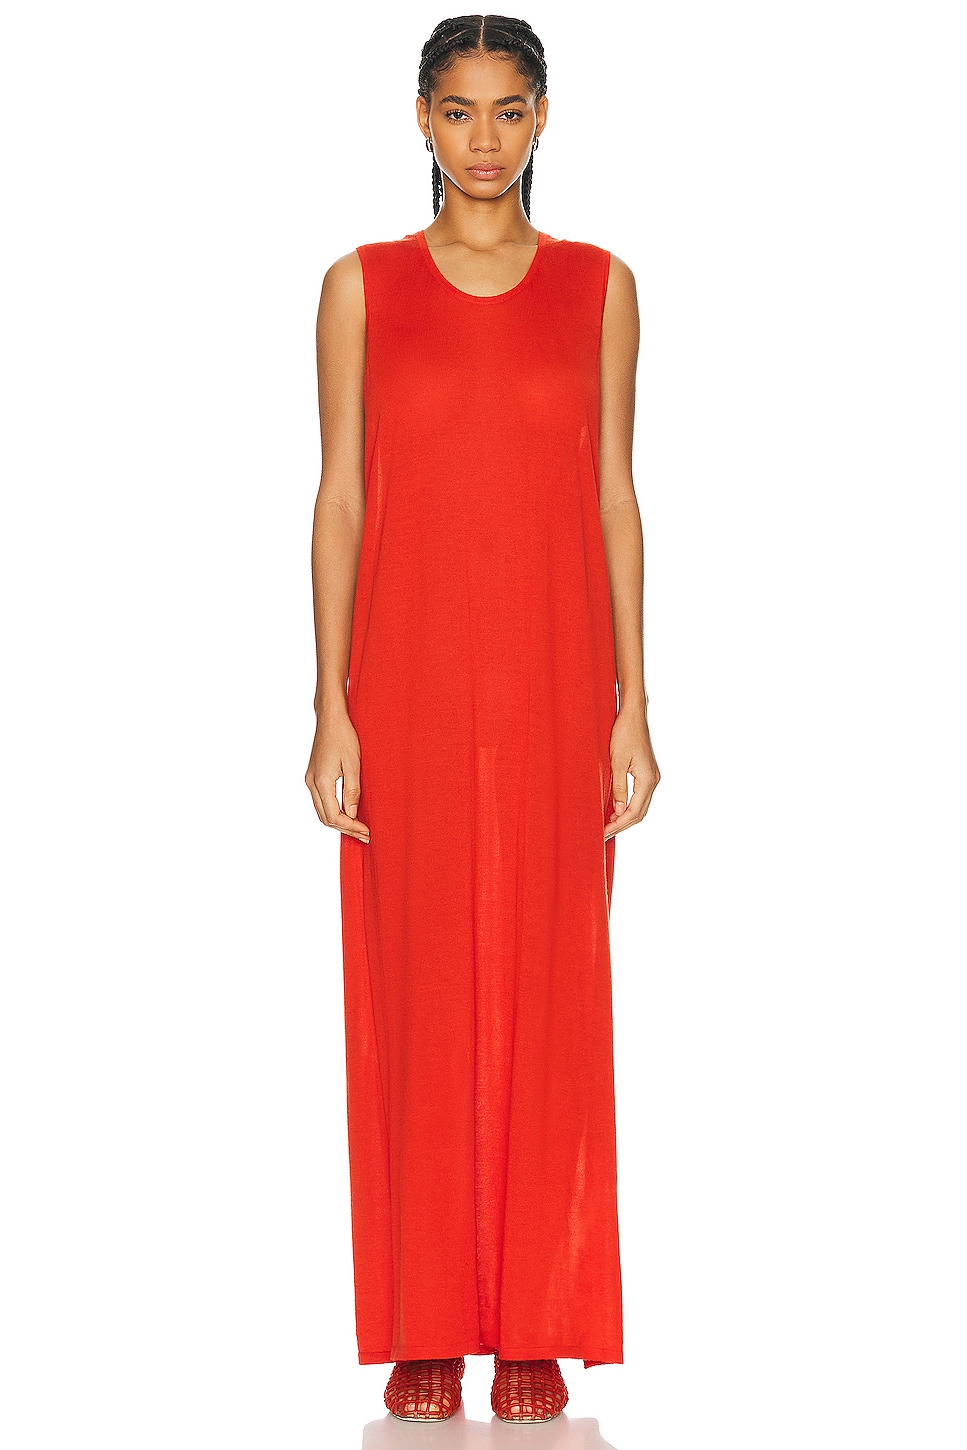 Image 1 of The Row Gianna Dress in Firetruck